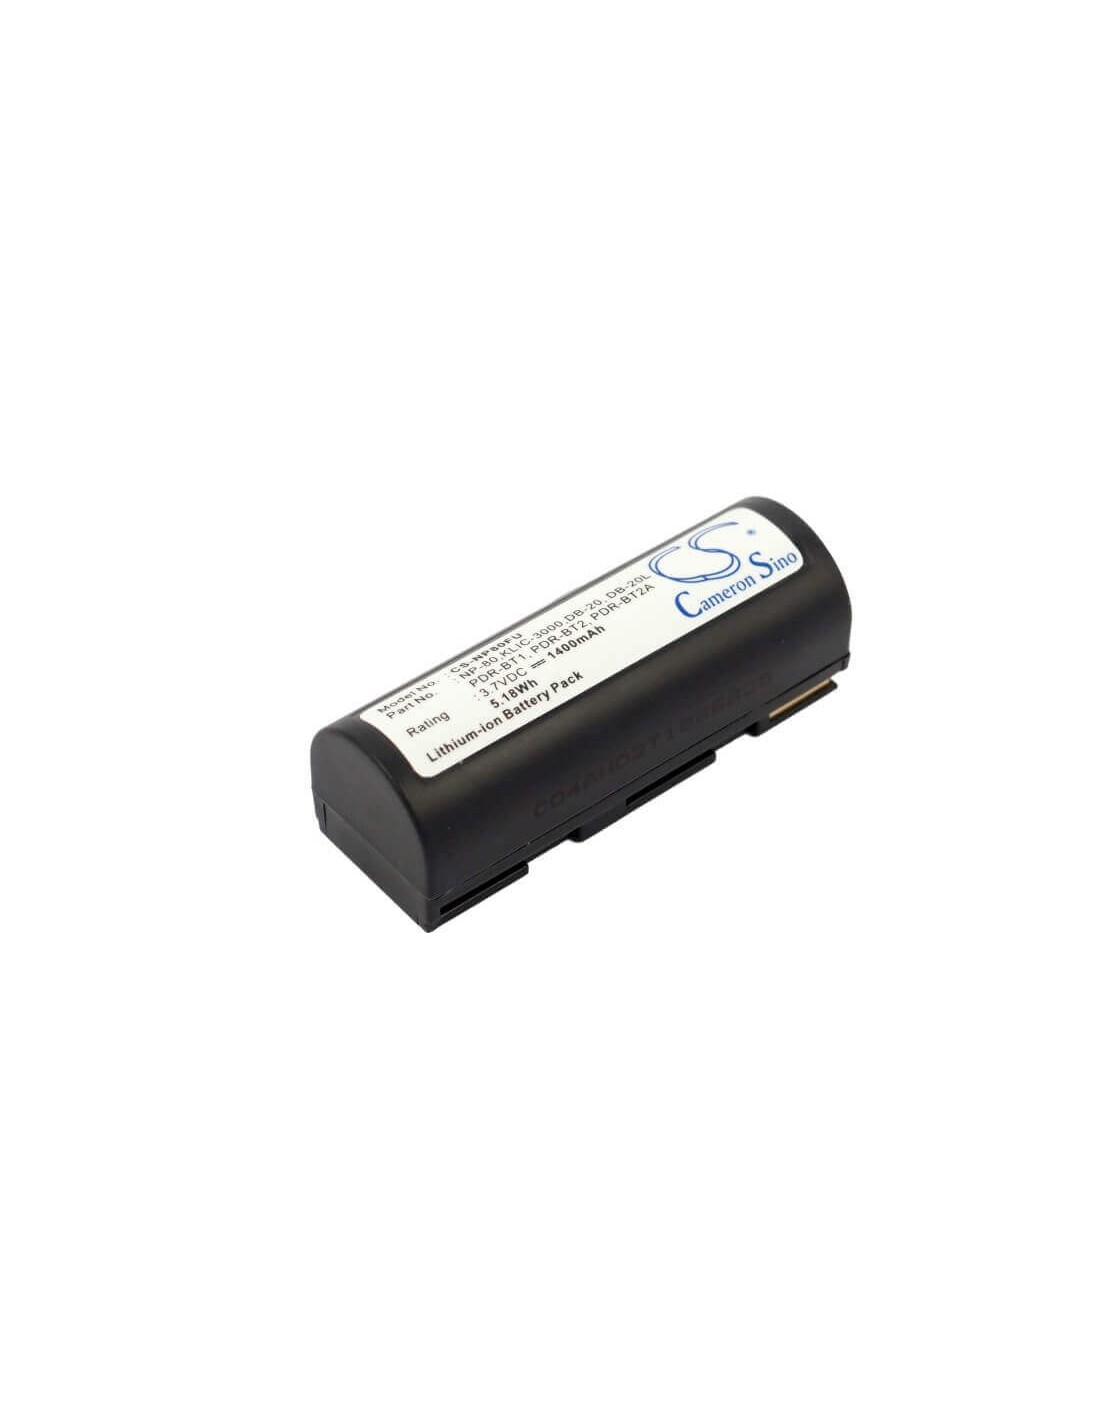 Battery for Leica Digilux Zoom 3.7V, 1400mAh - 5.18Wh